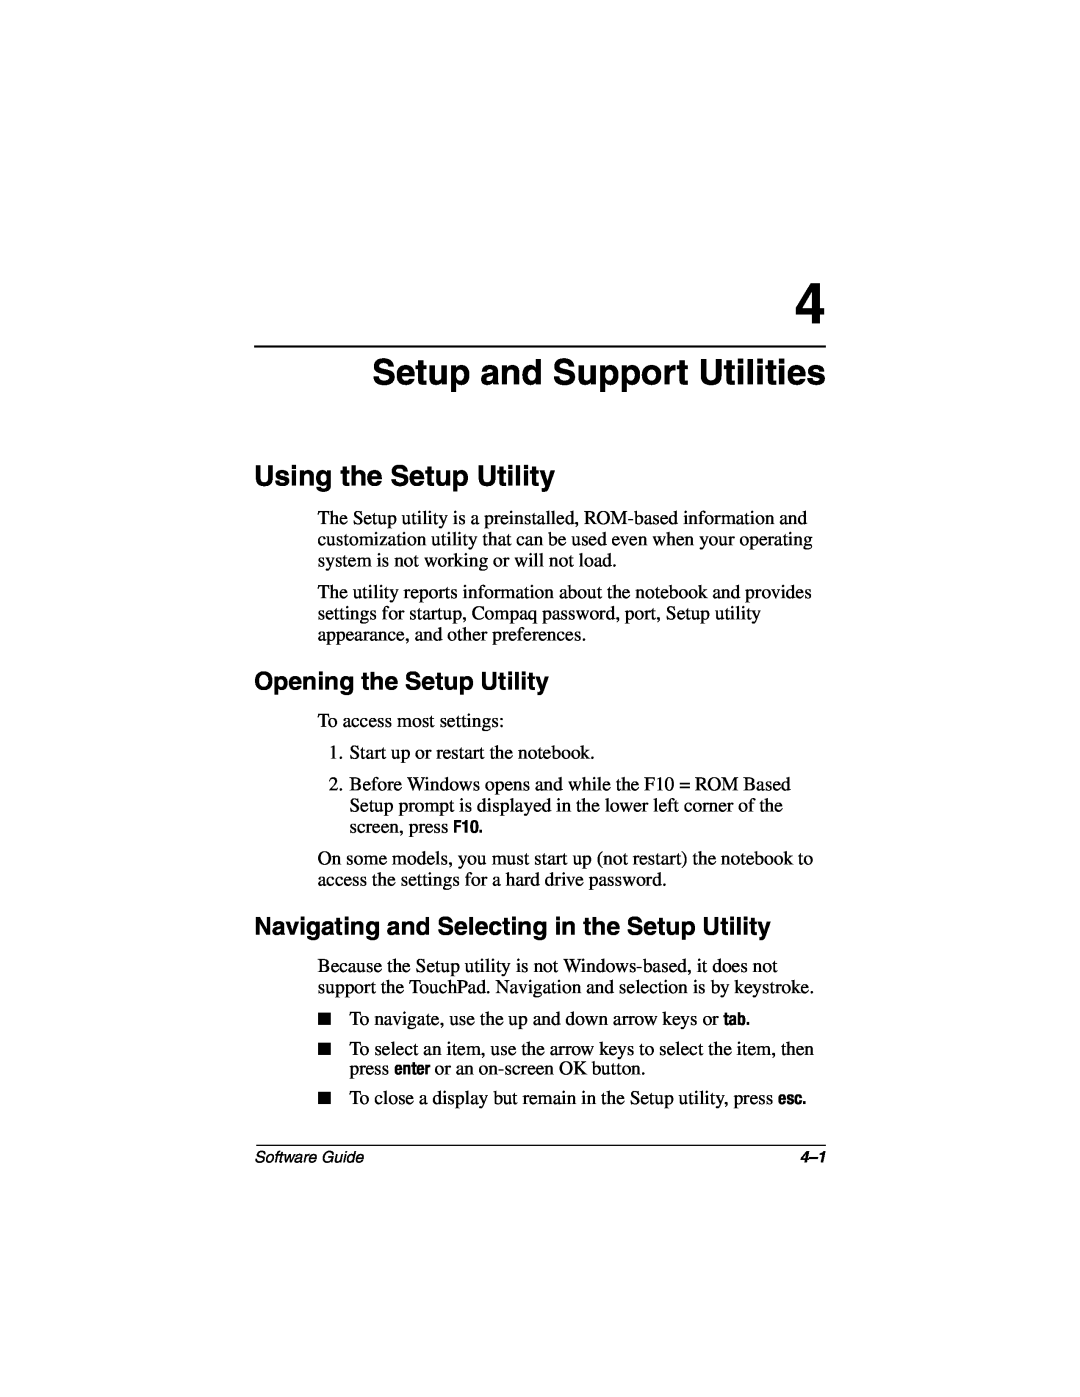 HP 3020US, 3016US, 3017CL, 3015US, 3018CL Setup and Support Utilities, Using the Setup Utility, Opening the Setup Utility 